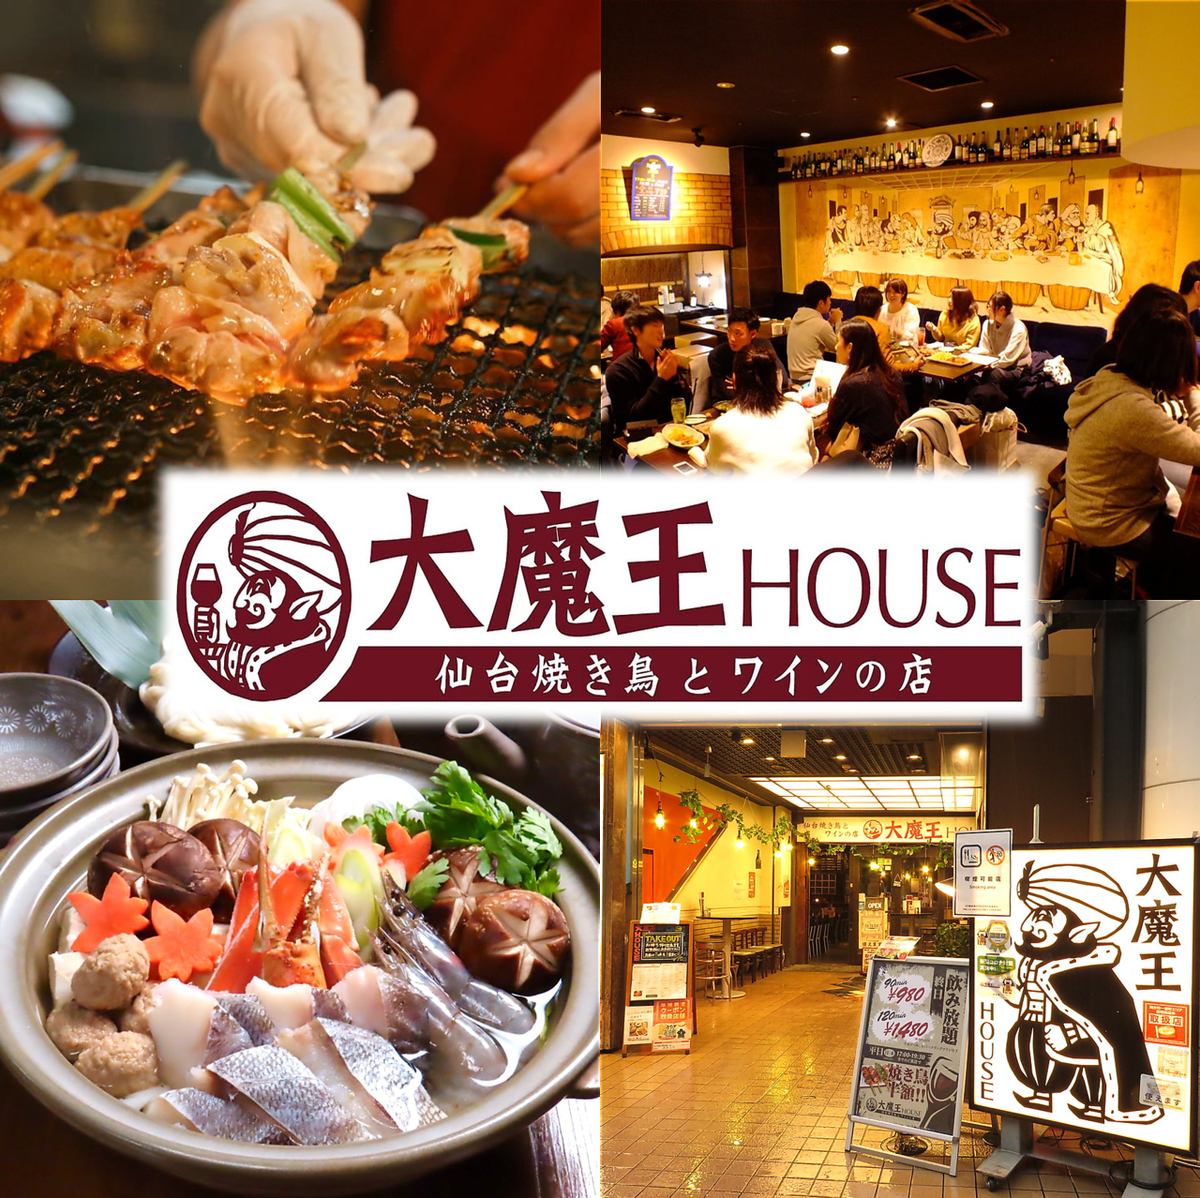 Along Kokubuncho Street ☆ Open from 17:00! All seats are smoking. For yakitori and wine, go to Daimaou HOUSE ♪